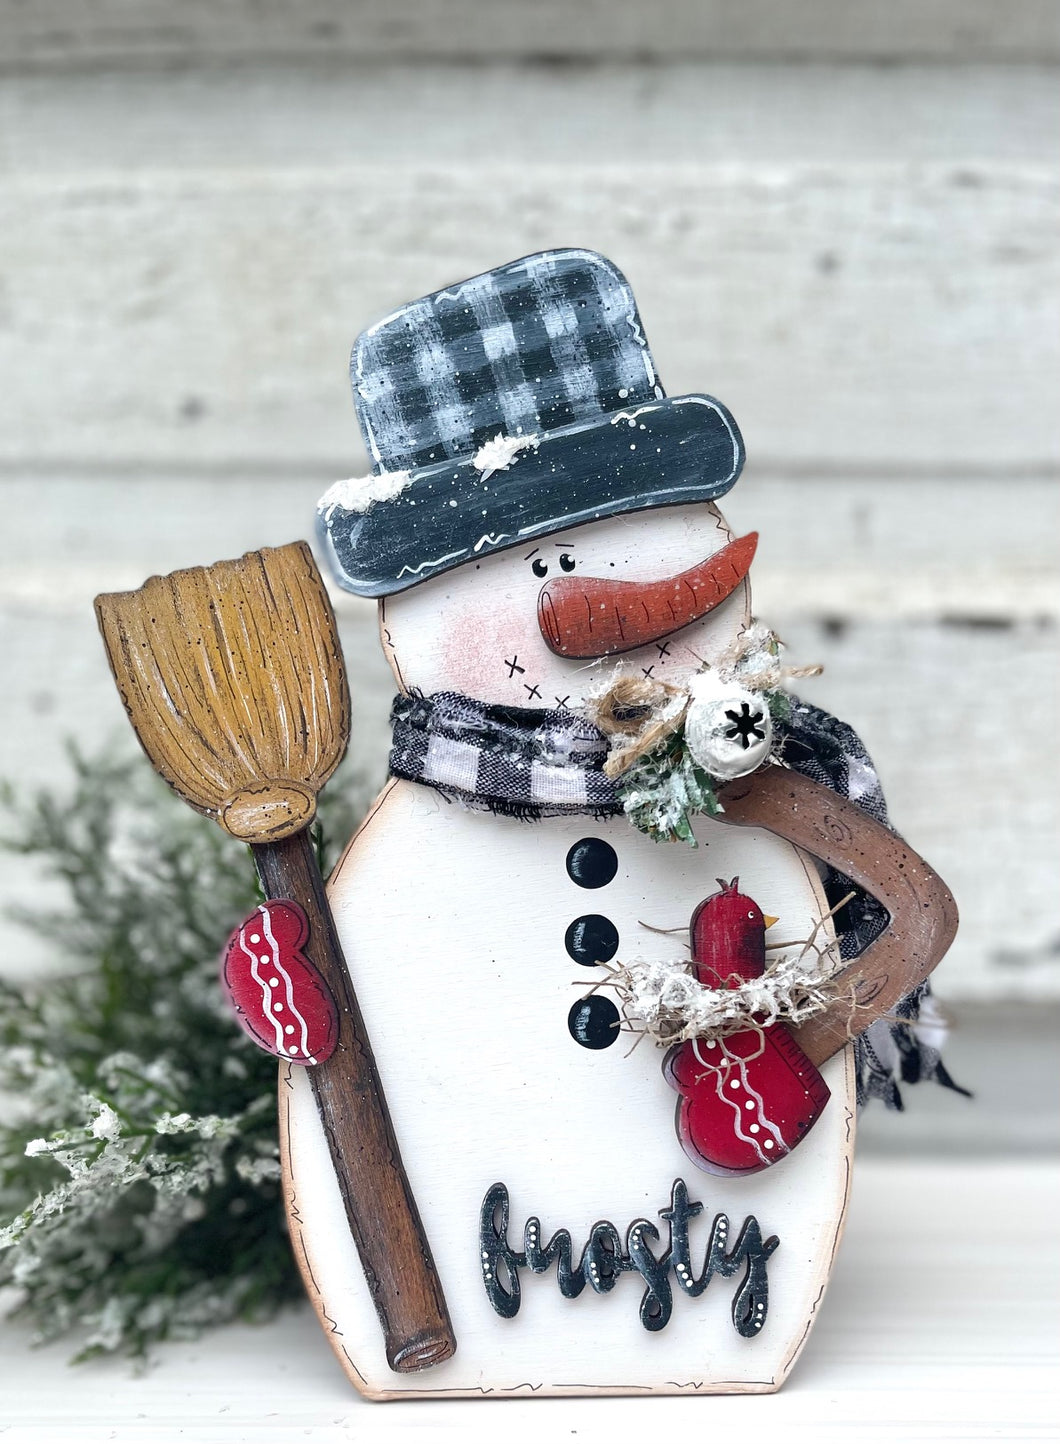 K307 Frosty Snowman with Broom SCROLL SAW BAND SAW PATTERN